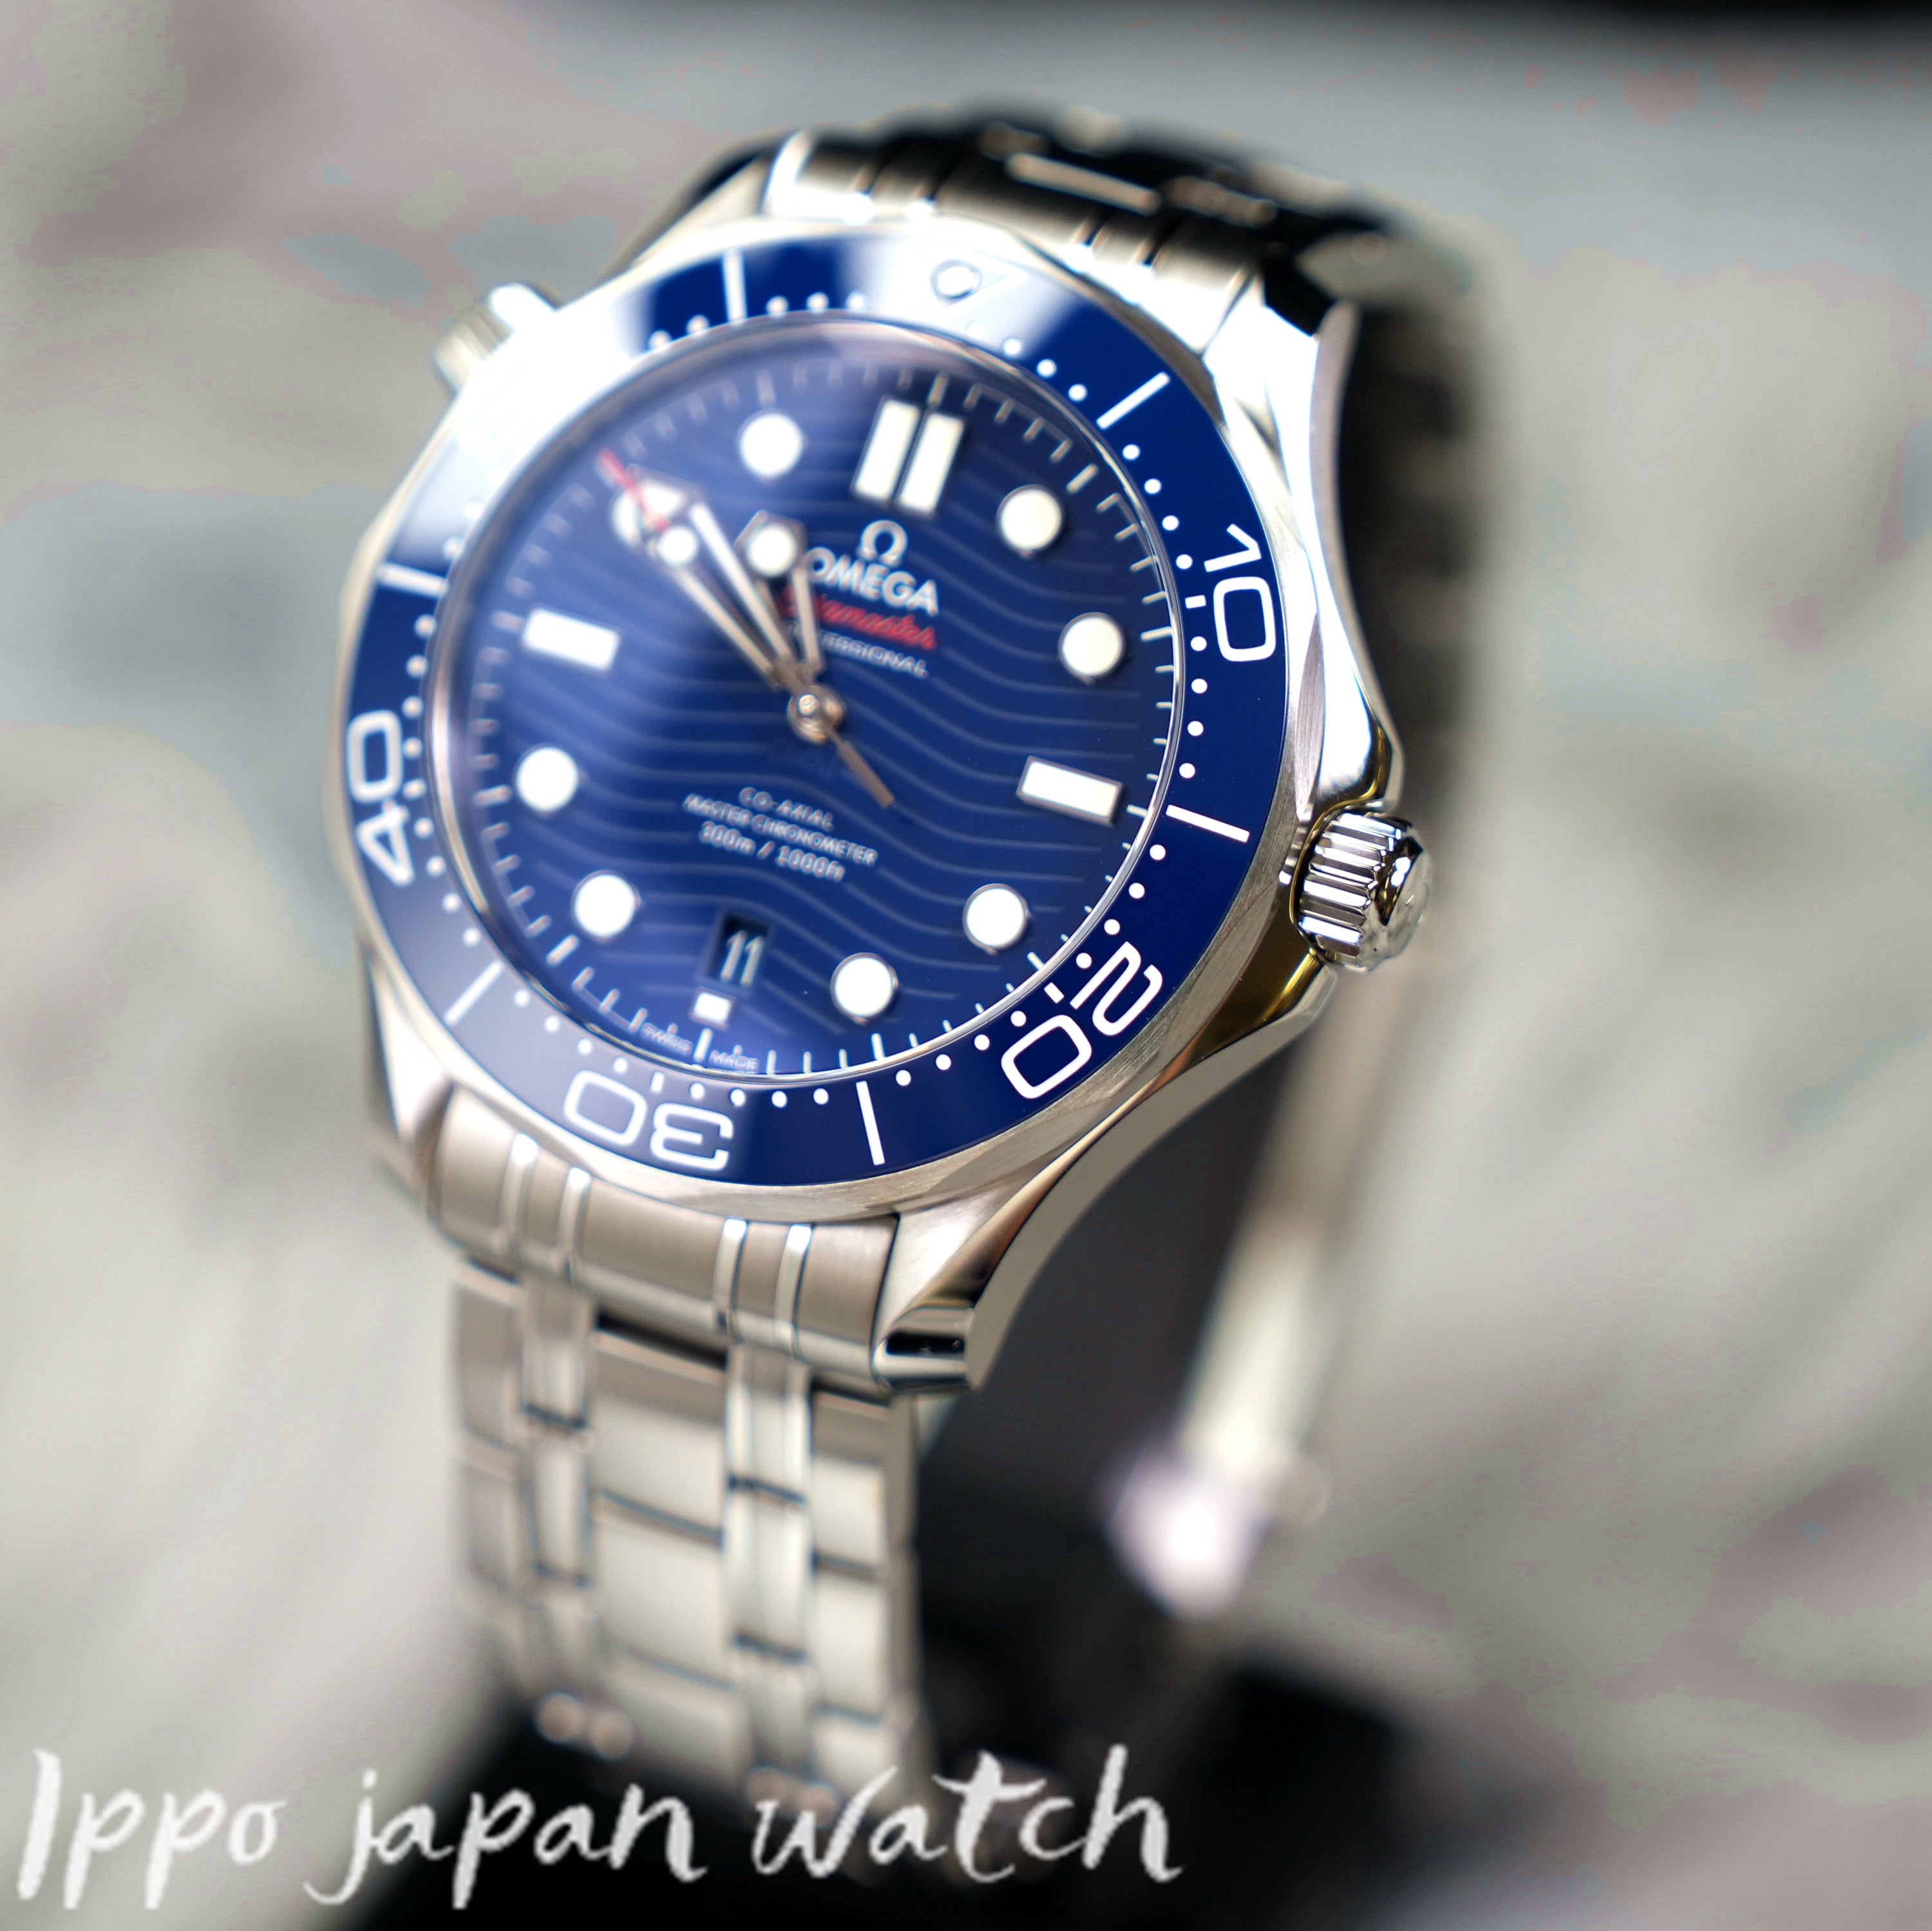 Omega DIVER 30 0M CO-AXIAL MASTER CHRONOMETER 42 M﻿M 210.30.42.20.03.001 watch - IPPO JAPAN WATCH 